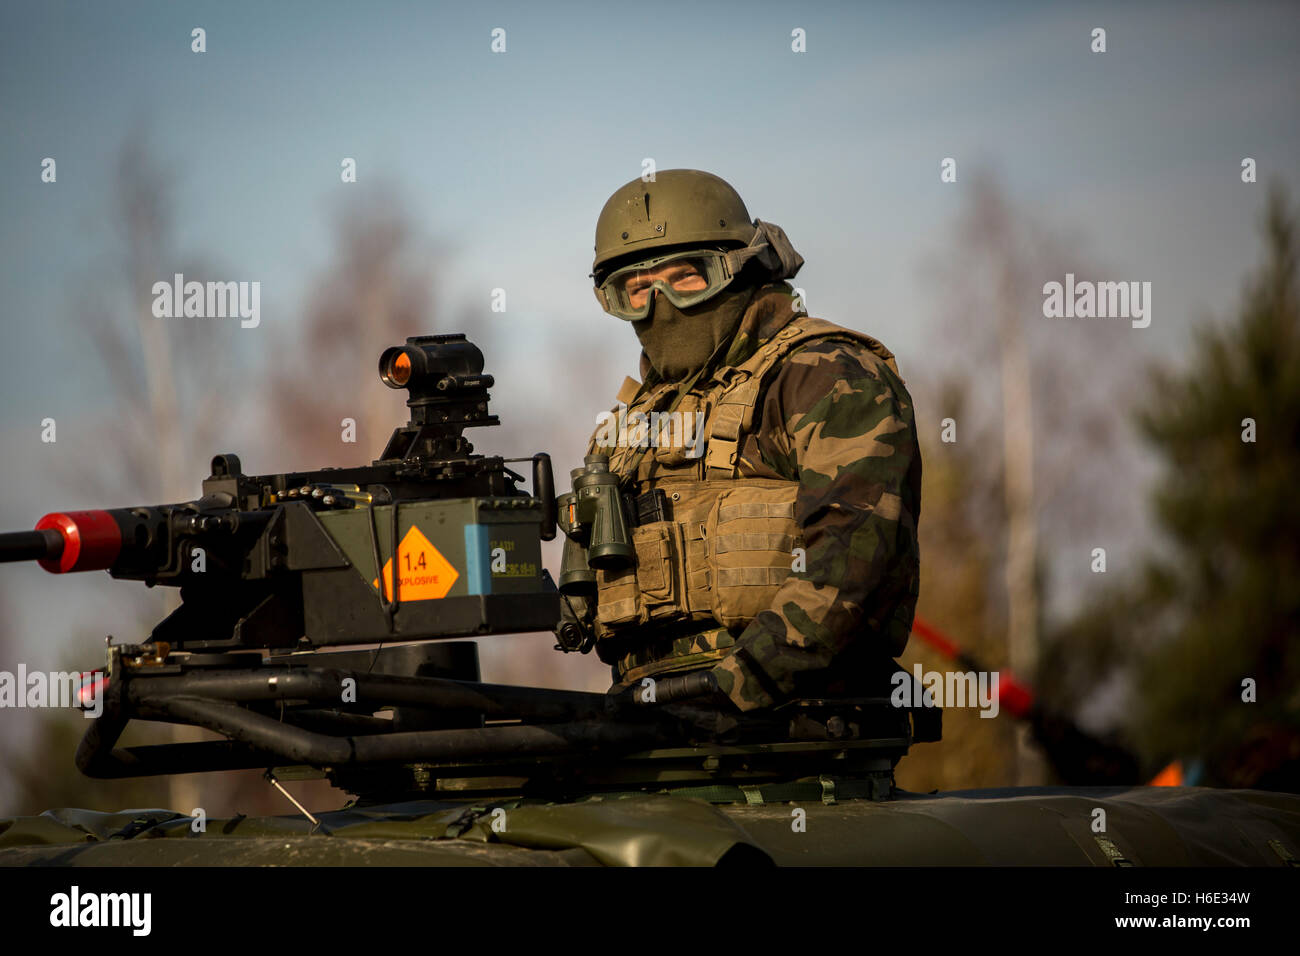 A Royal Dutch Marine soldier conducts a patrol during Exercise Silver Arrow at the Adazi Military Base October 20, 2016 in Adazi, Latvia. Stock Photo